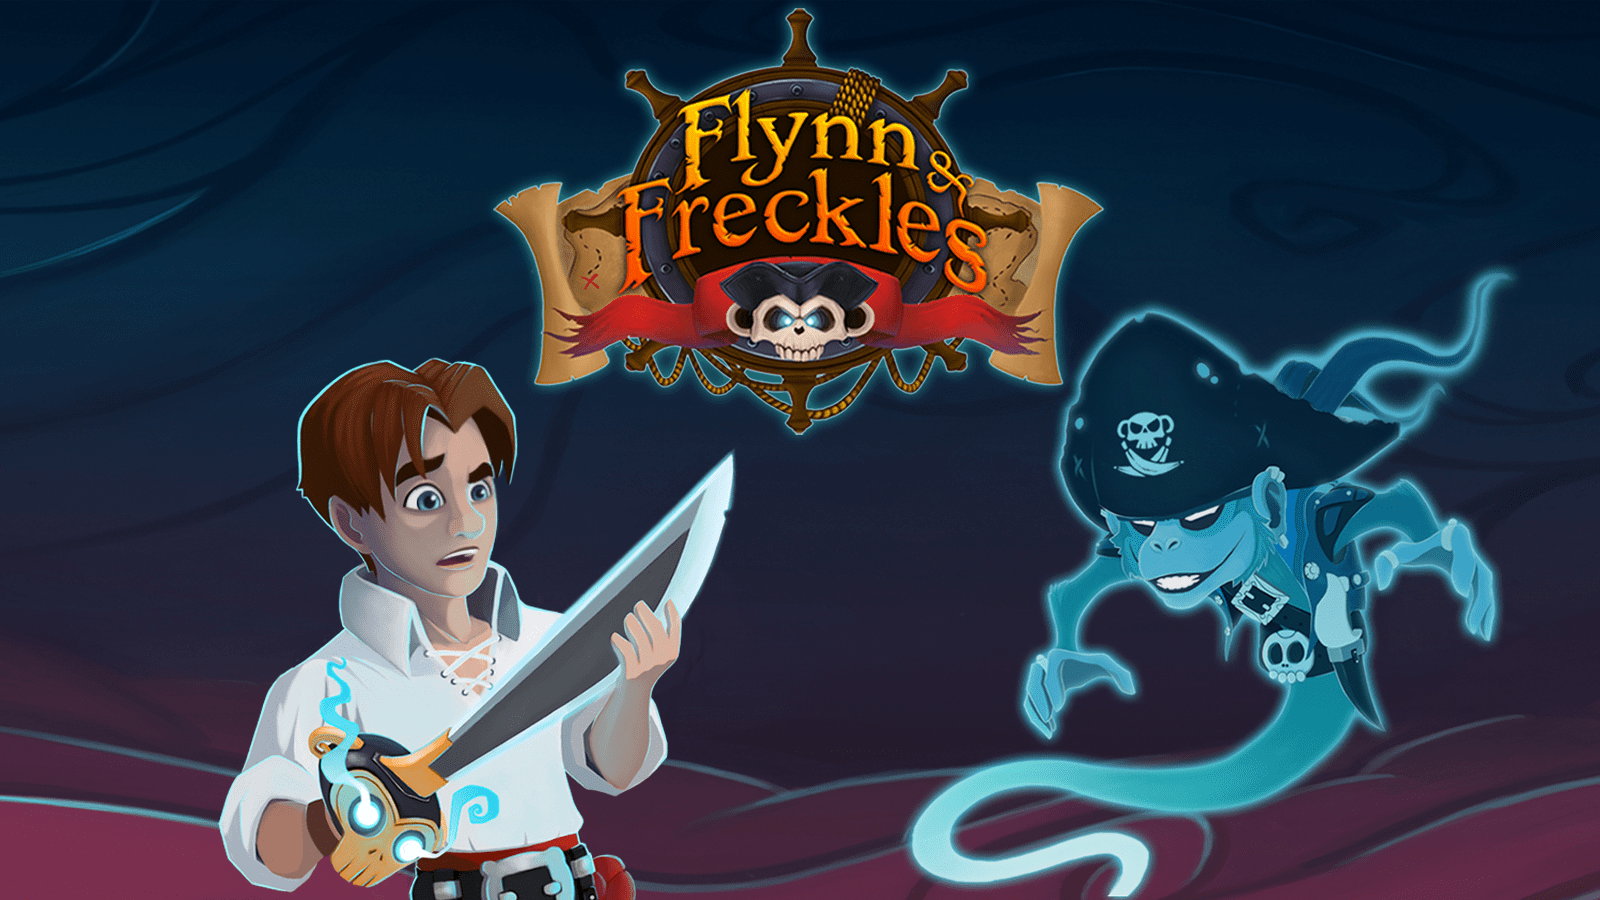 Flynn and Freckles review: Monkey Island and Zelda had a baby